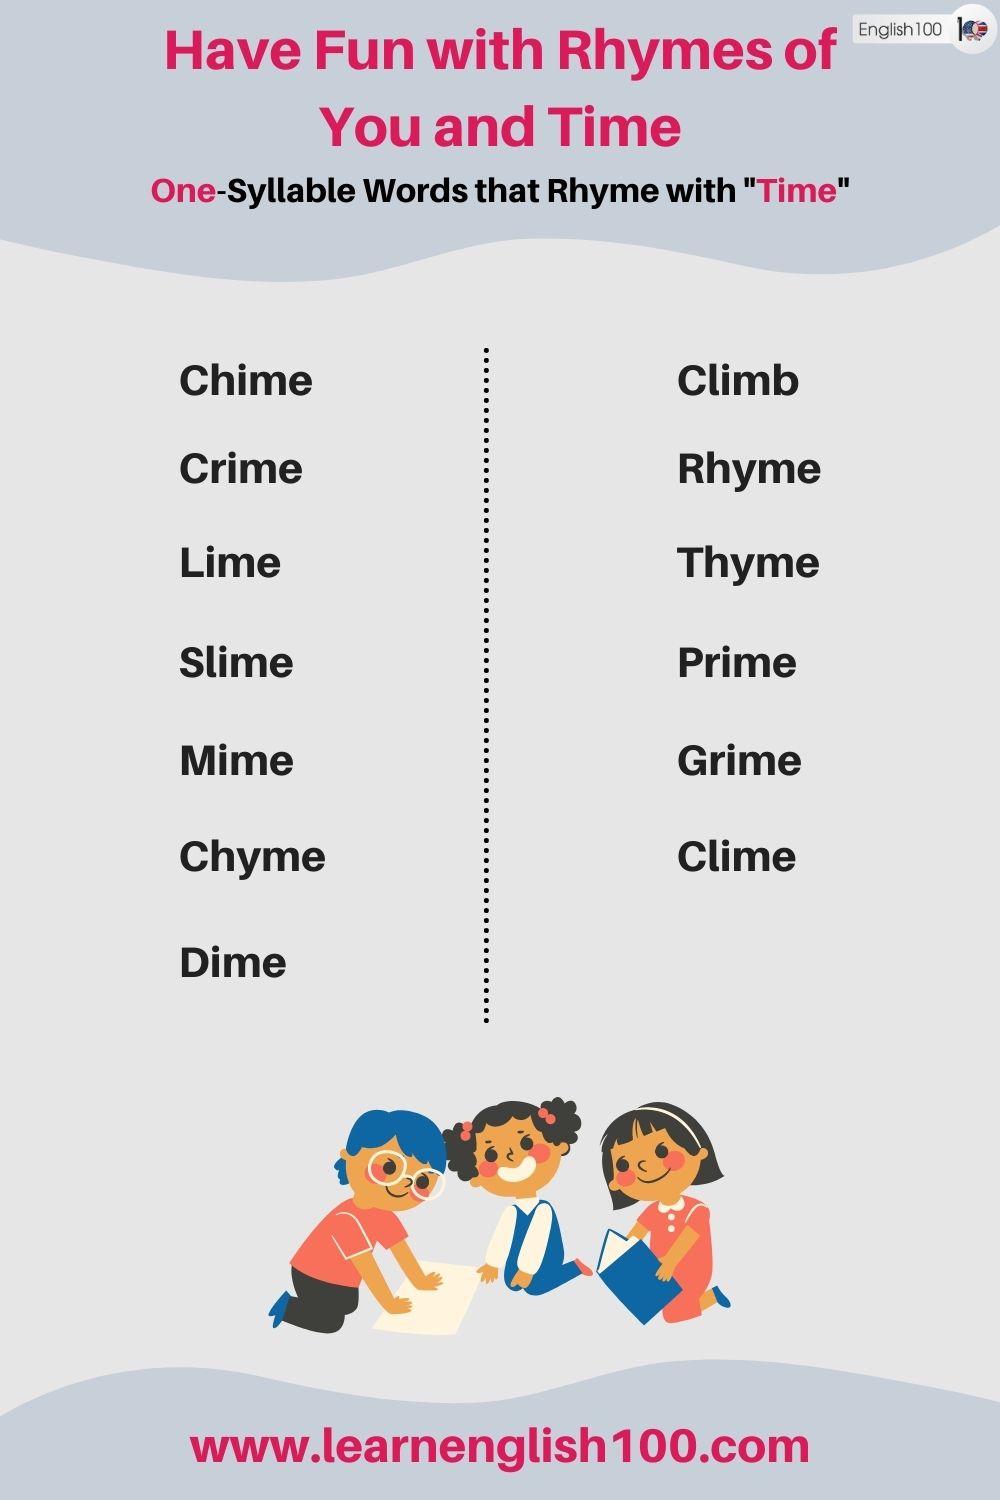 Have Fun with Rhymes of You and Time